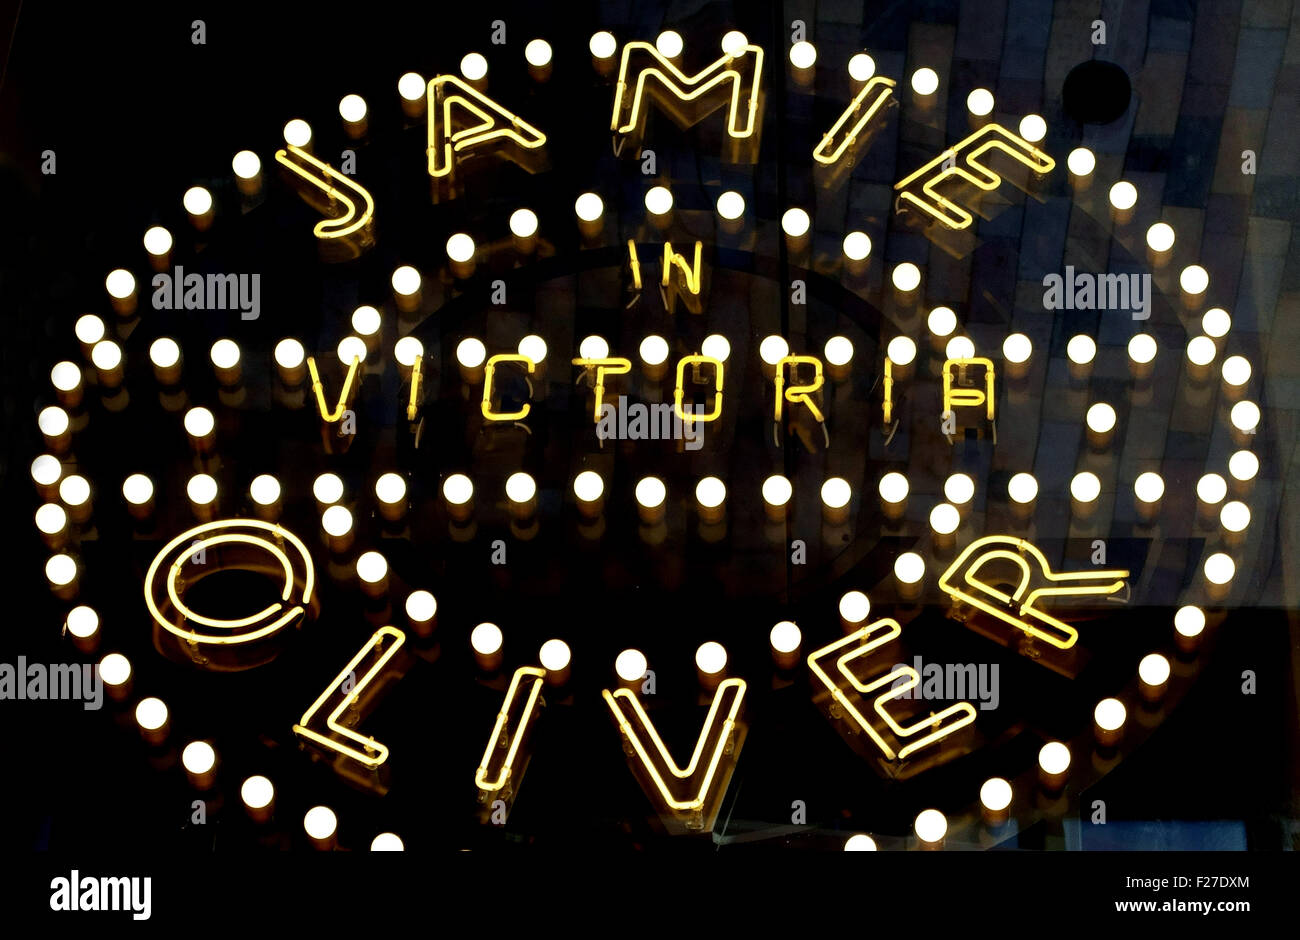 Sign on Jamie Oliver restaurant in Victoria, London Stock Photo